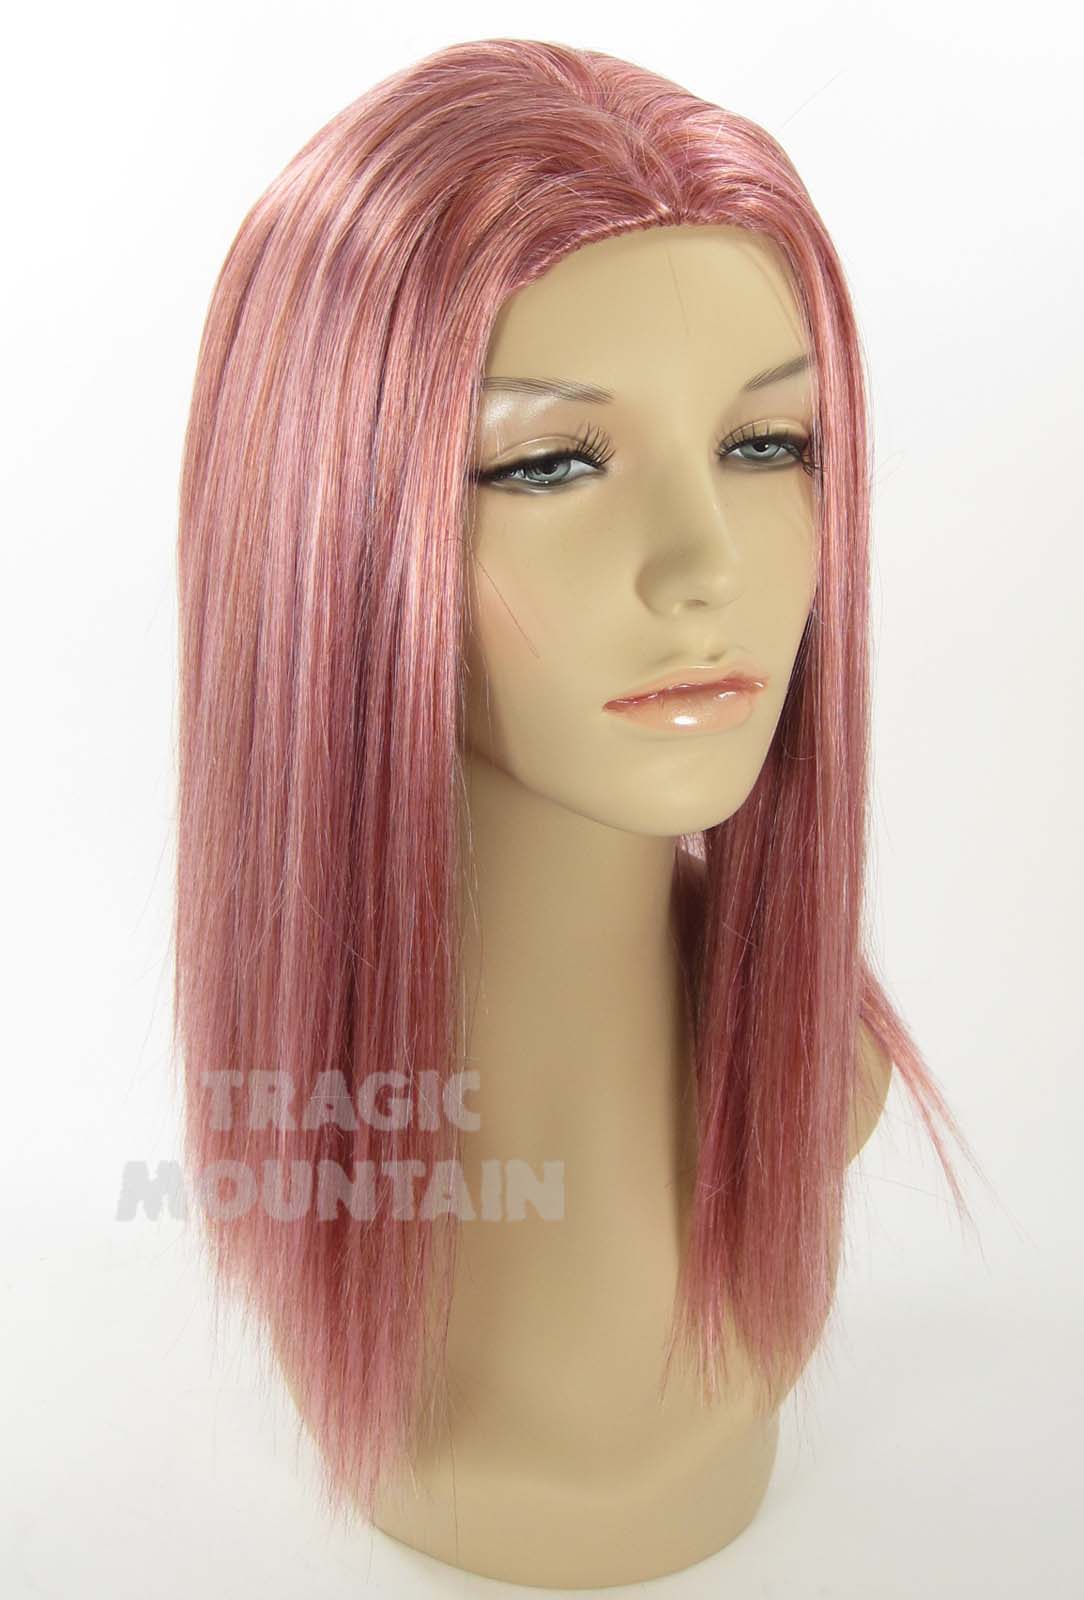 Dark Pink Cotton Candy Wig Katy Perry Punk Rock Costume Anime Adult